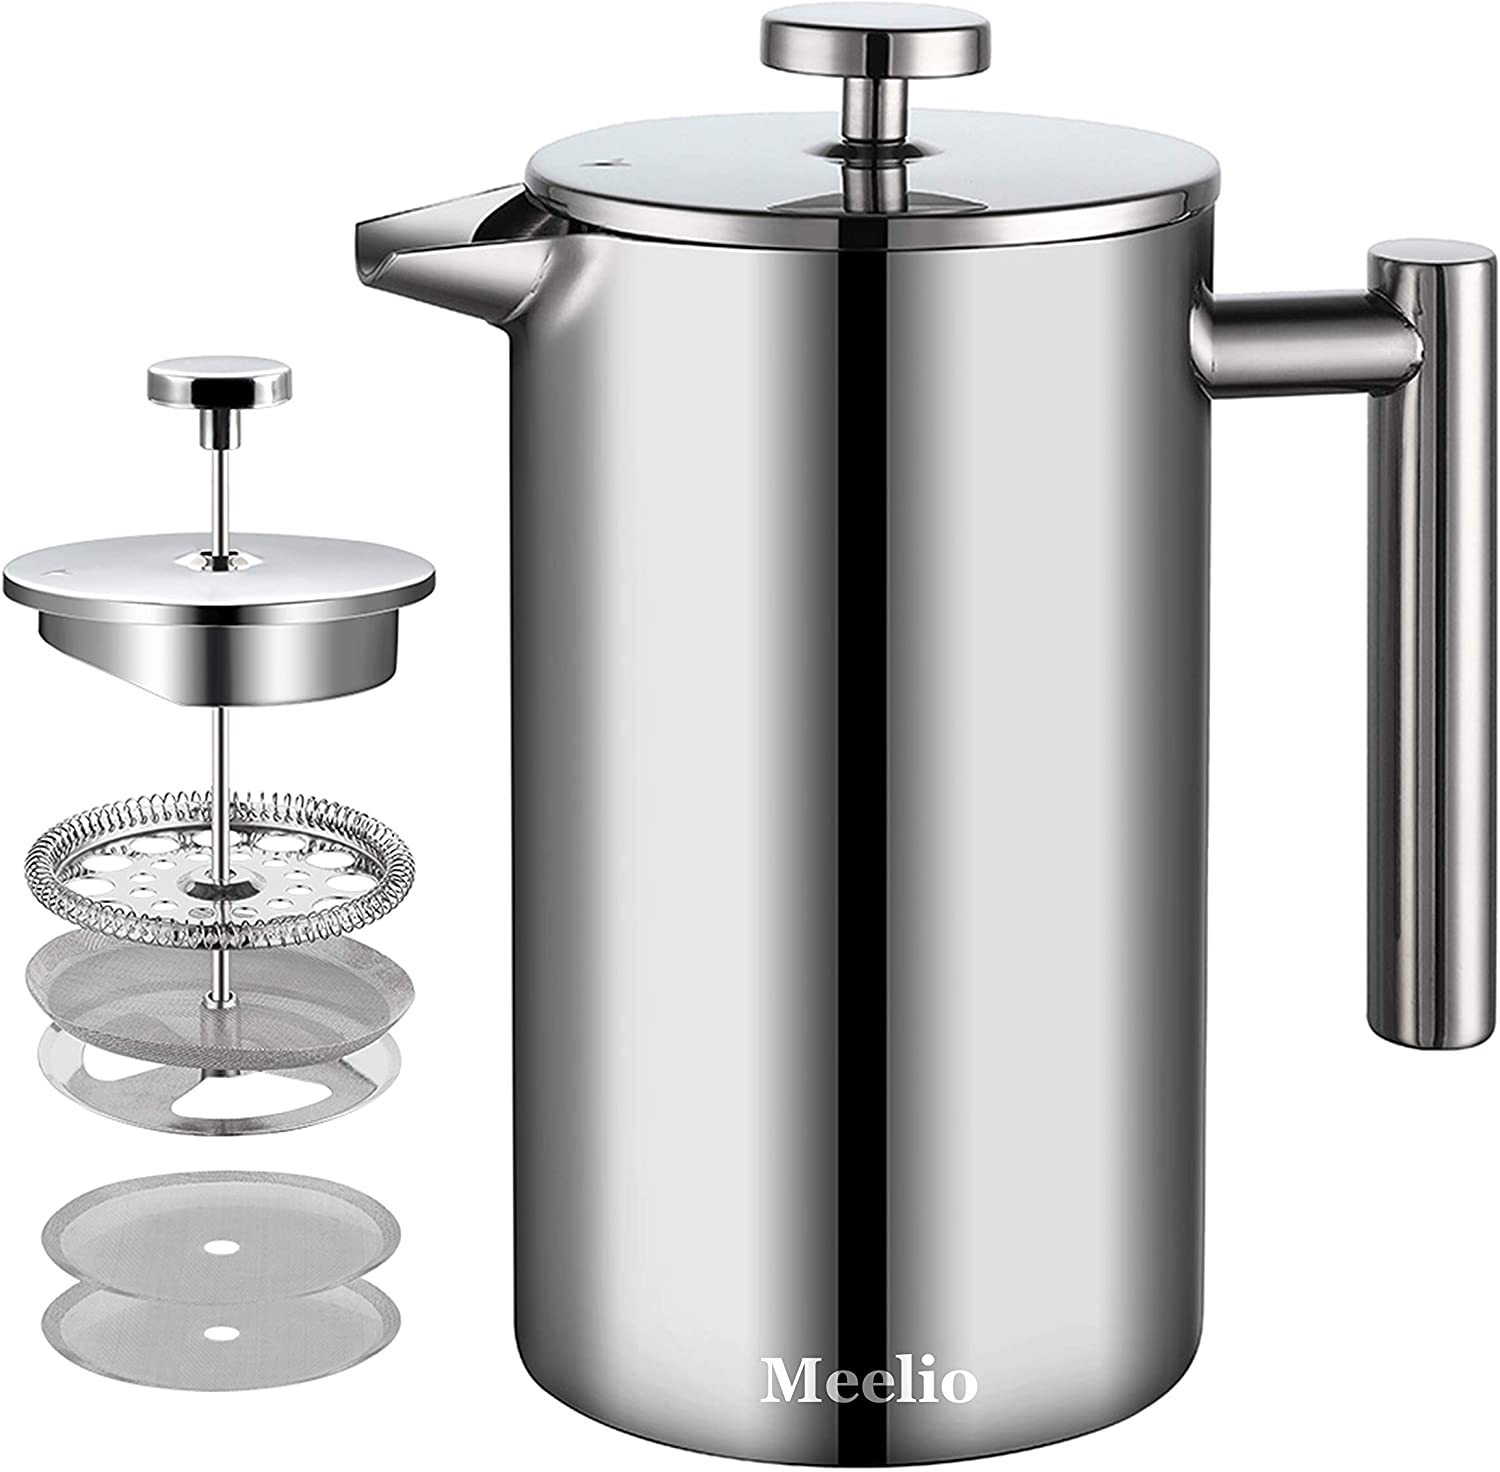 MeelioCafe Coffee Press French Press 1.5 Litres Stainless Steel (10 Cups) Thermal Coffee Maker Double-Walled Insulated Coffee Press Small 1500 ml C0ffee Press